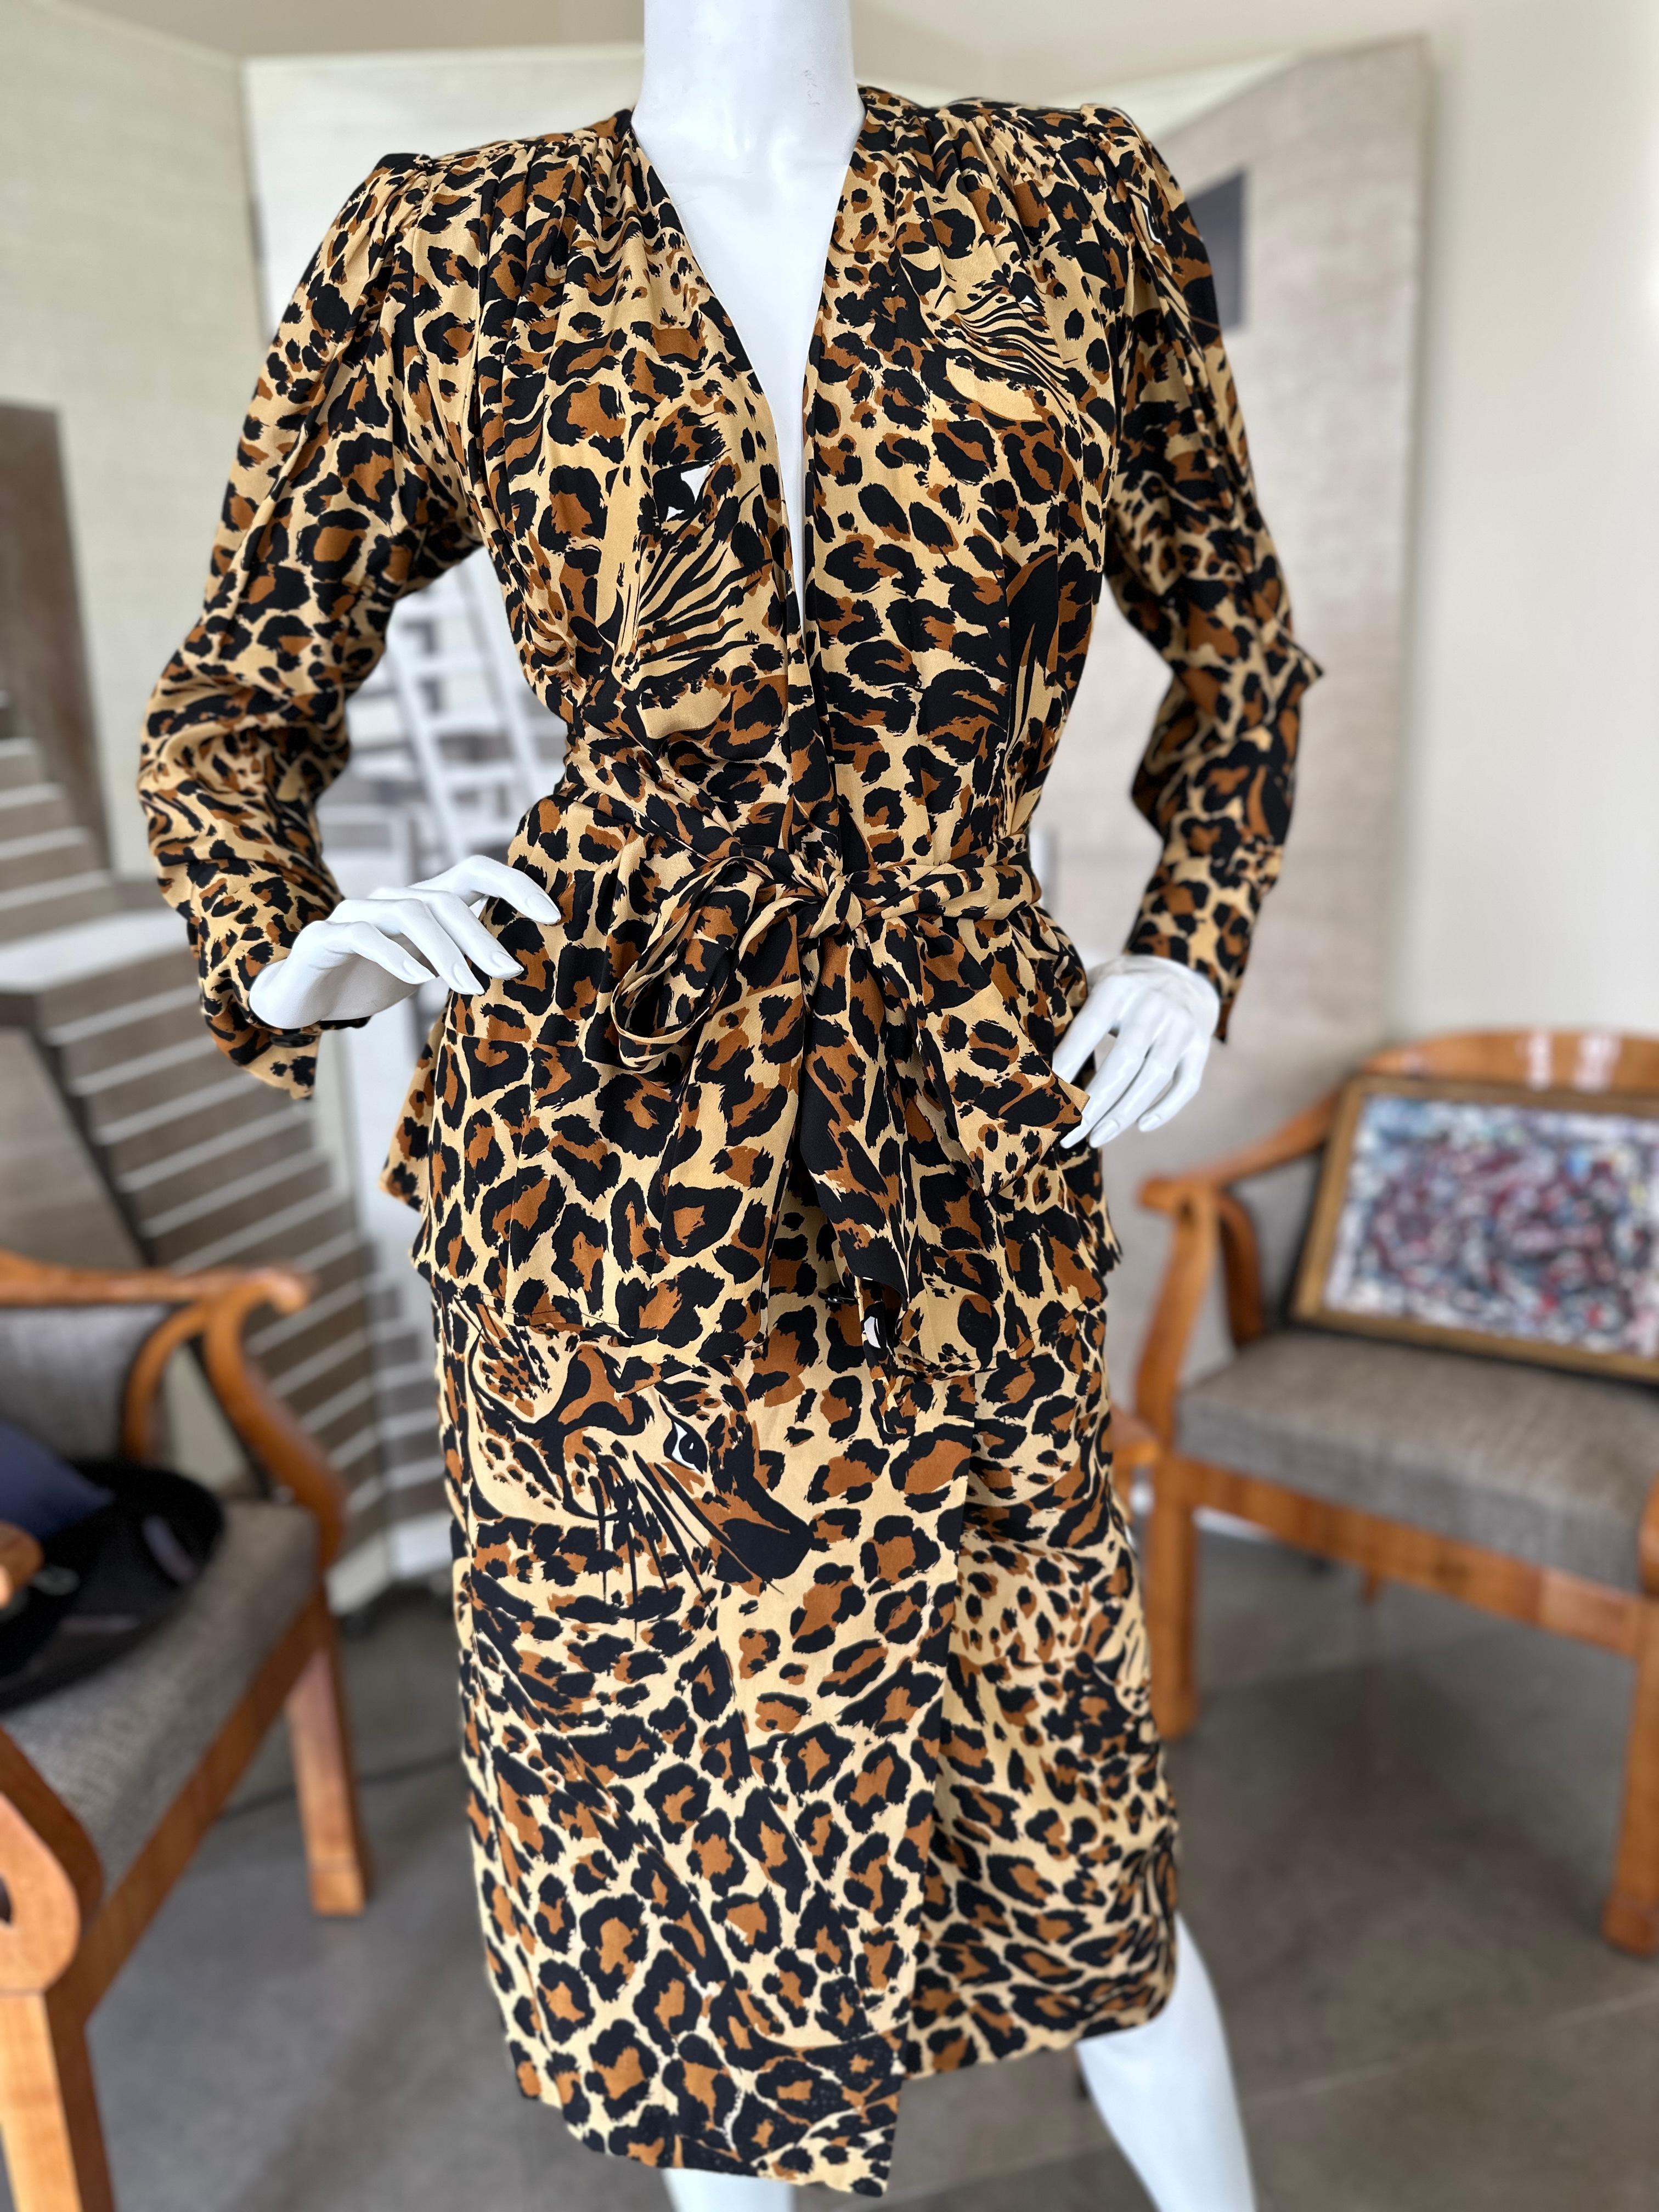 Yves Saint Laurent Rive Gauche Fall 1986 Silk Leopard Print 3 Pc Cocktail Dress.
Featuring a wrap skirt, long sleeve blouse and long wide sash belt.
  This is so pretty, it is much sexier than the photos show. 
  Size 36
  Bust 38